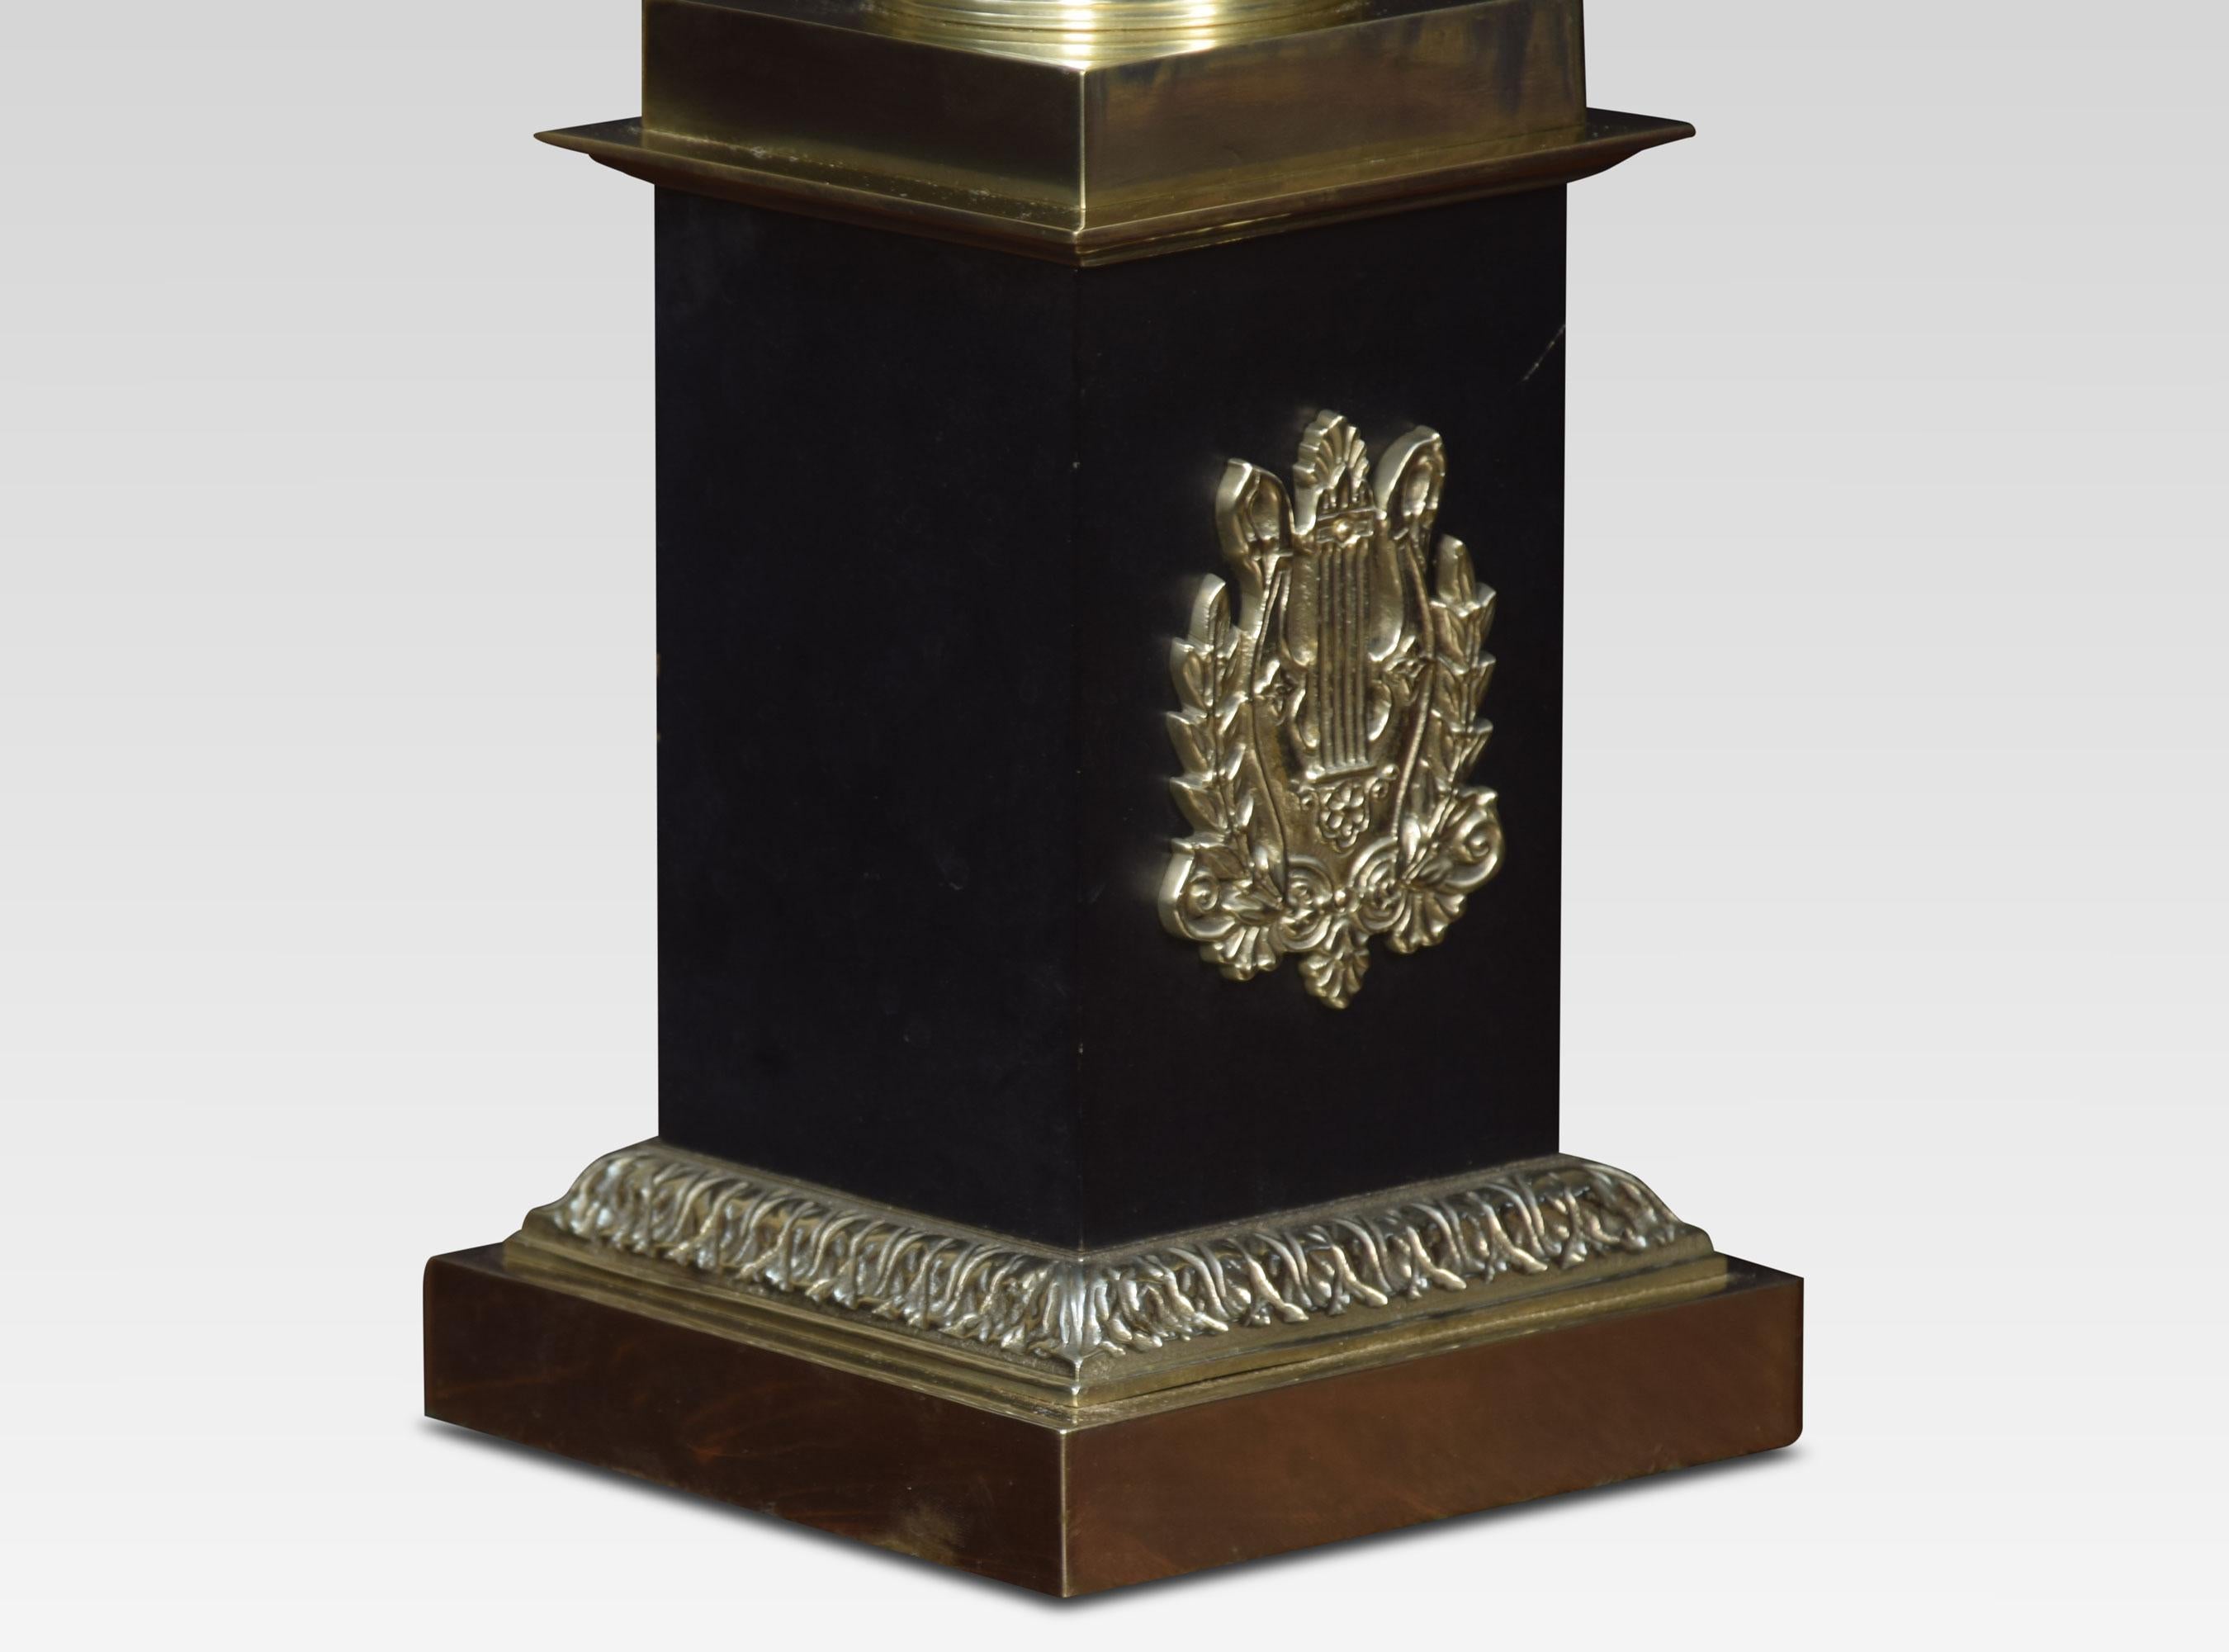 Brass table lamp of urn form above a stepped ebonized pedestal with central lyre motif. The lamp has been rewired.
Dimensions:
Height 20.5 inches
Width 7 inches
Depth 7 inches.